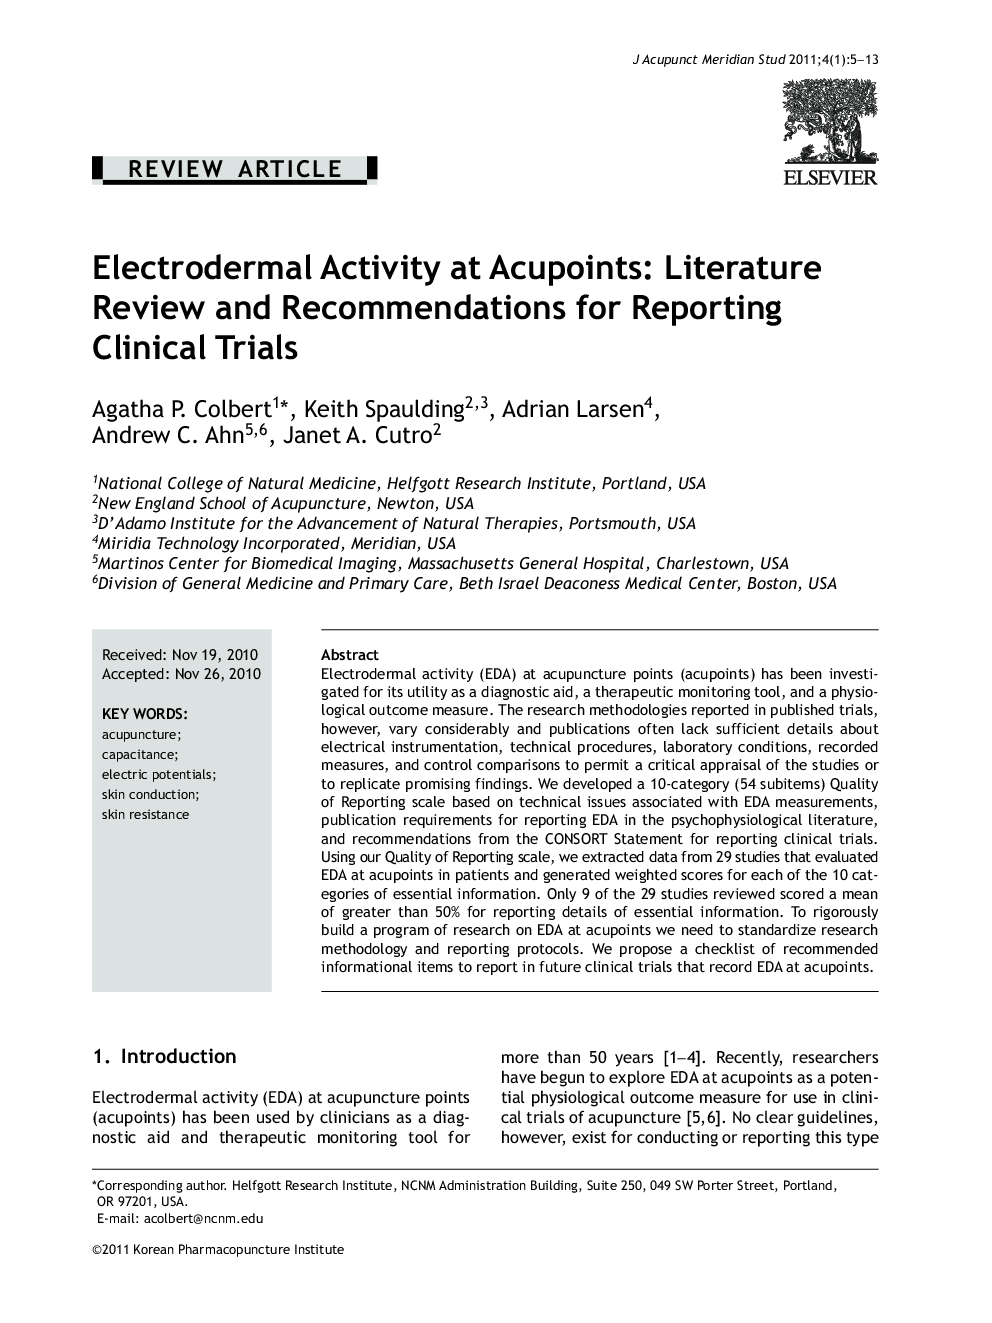 Electrodermal Activity at Acupoints: Literature Review and Recommendations for Reporting Clinical Trials